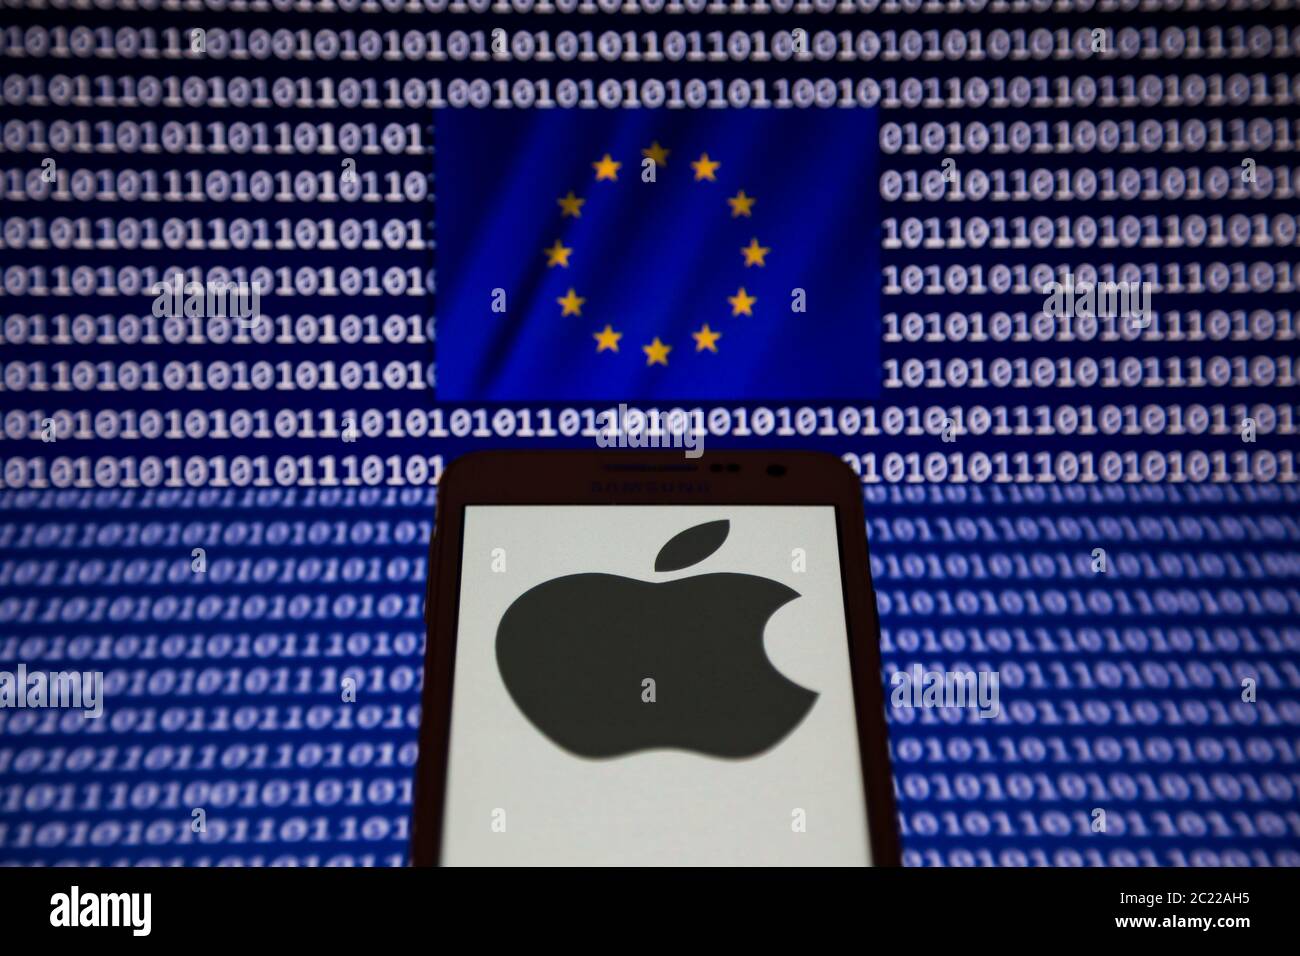 June 16, 2020, Asuncion, Paraguay: Illustration photo - Logo of Apple, a  technology company, is displayed on a smartphone backdropped by waving flag  of the European Union (EU) with binary code digits